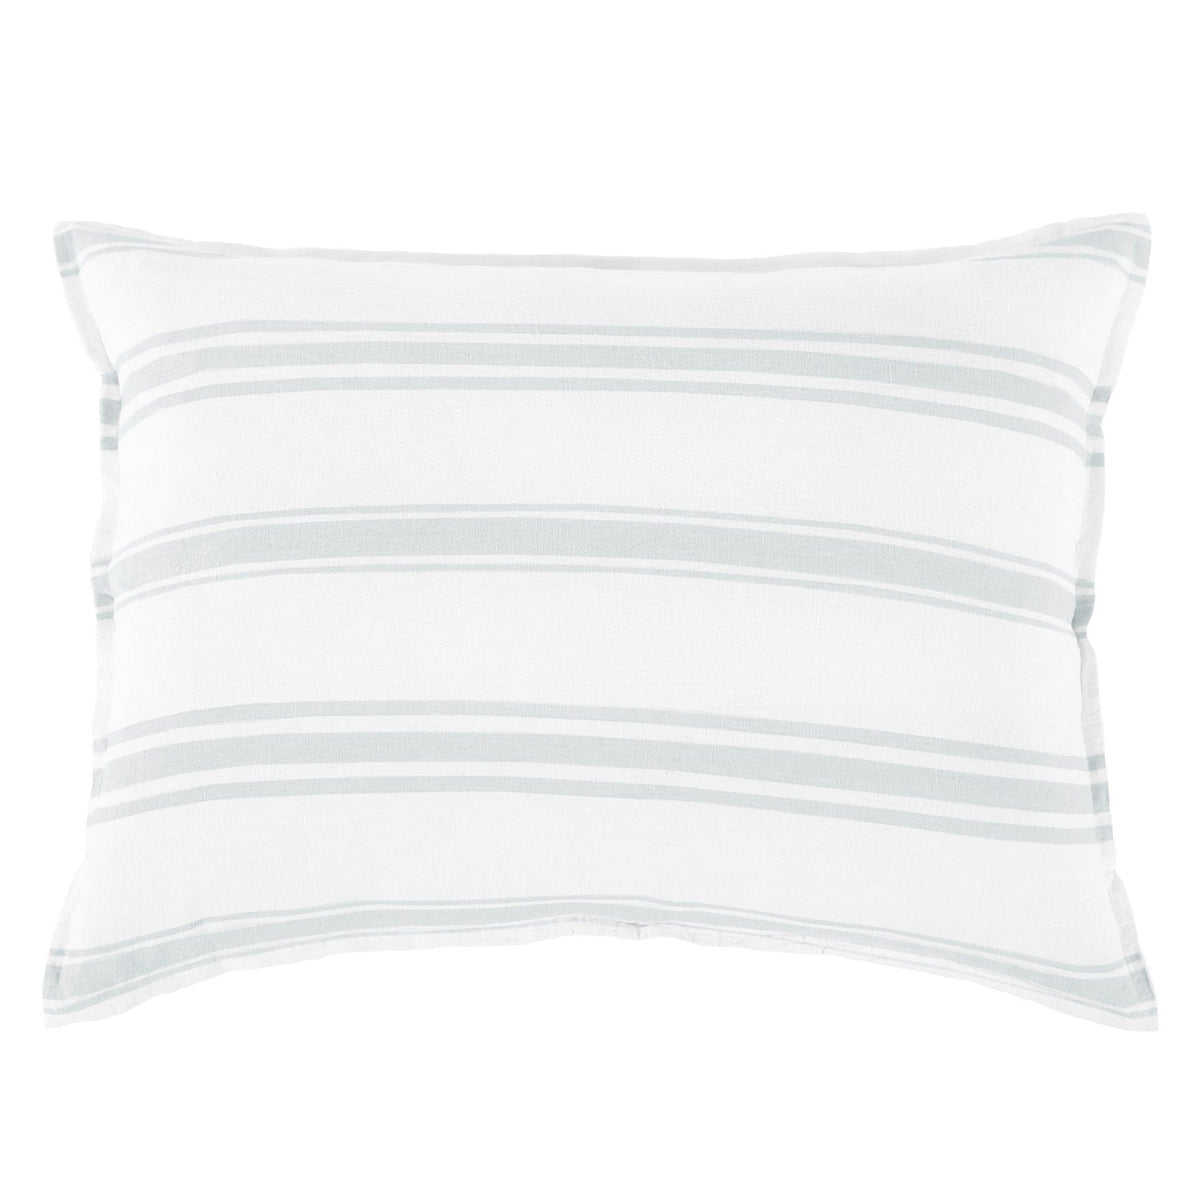 Jackson White/Ocean Big Pillow by Pom at Home